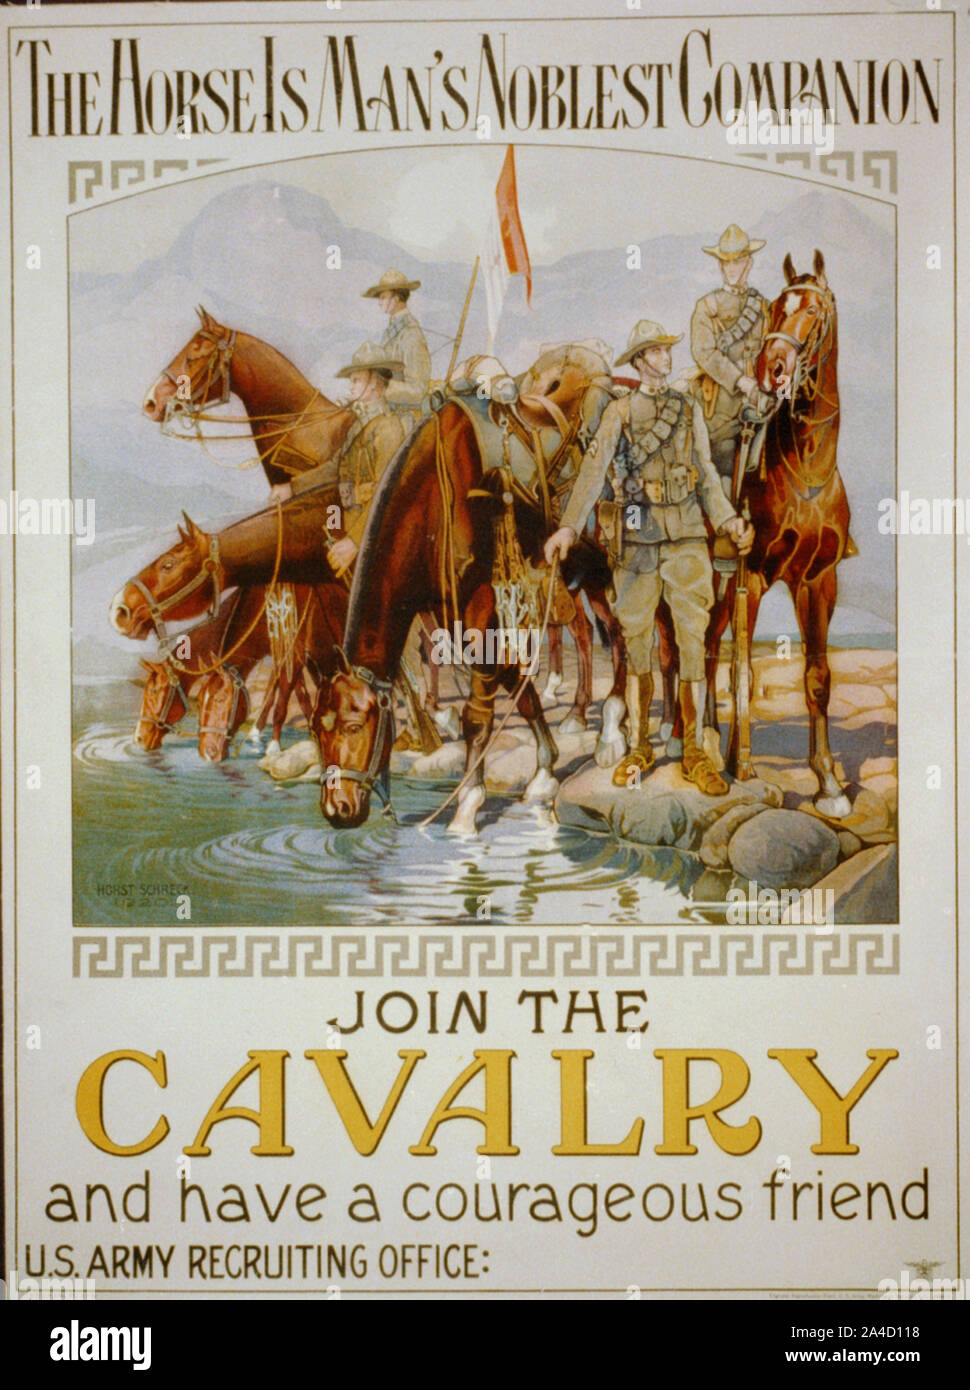 The horse is man's noblest companion - join the cavalry and have a courageous friend / Horst Schreck 1920. Stock Photo